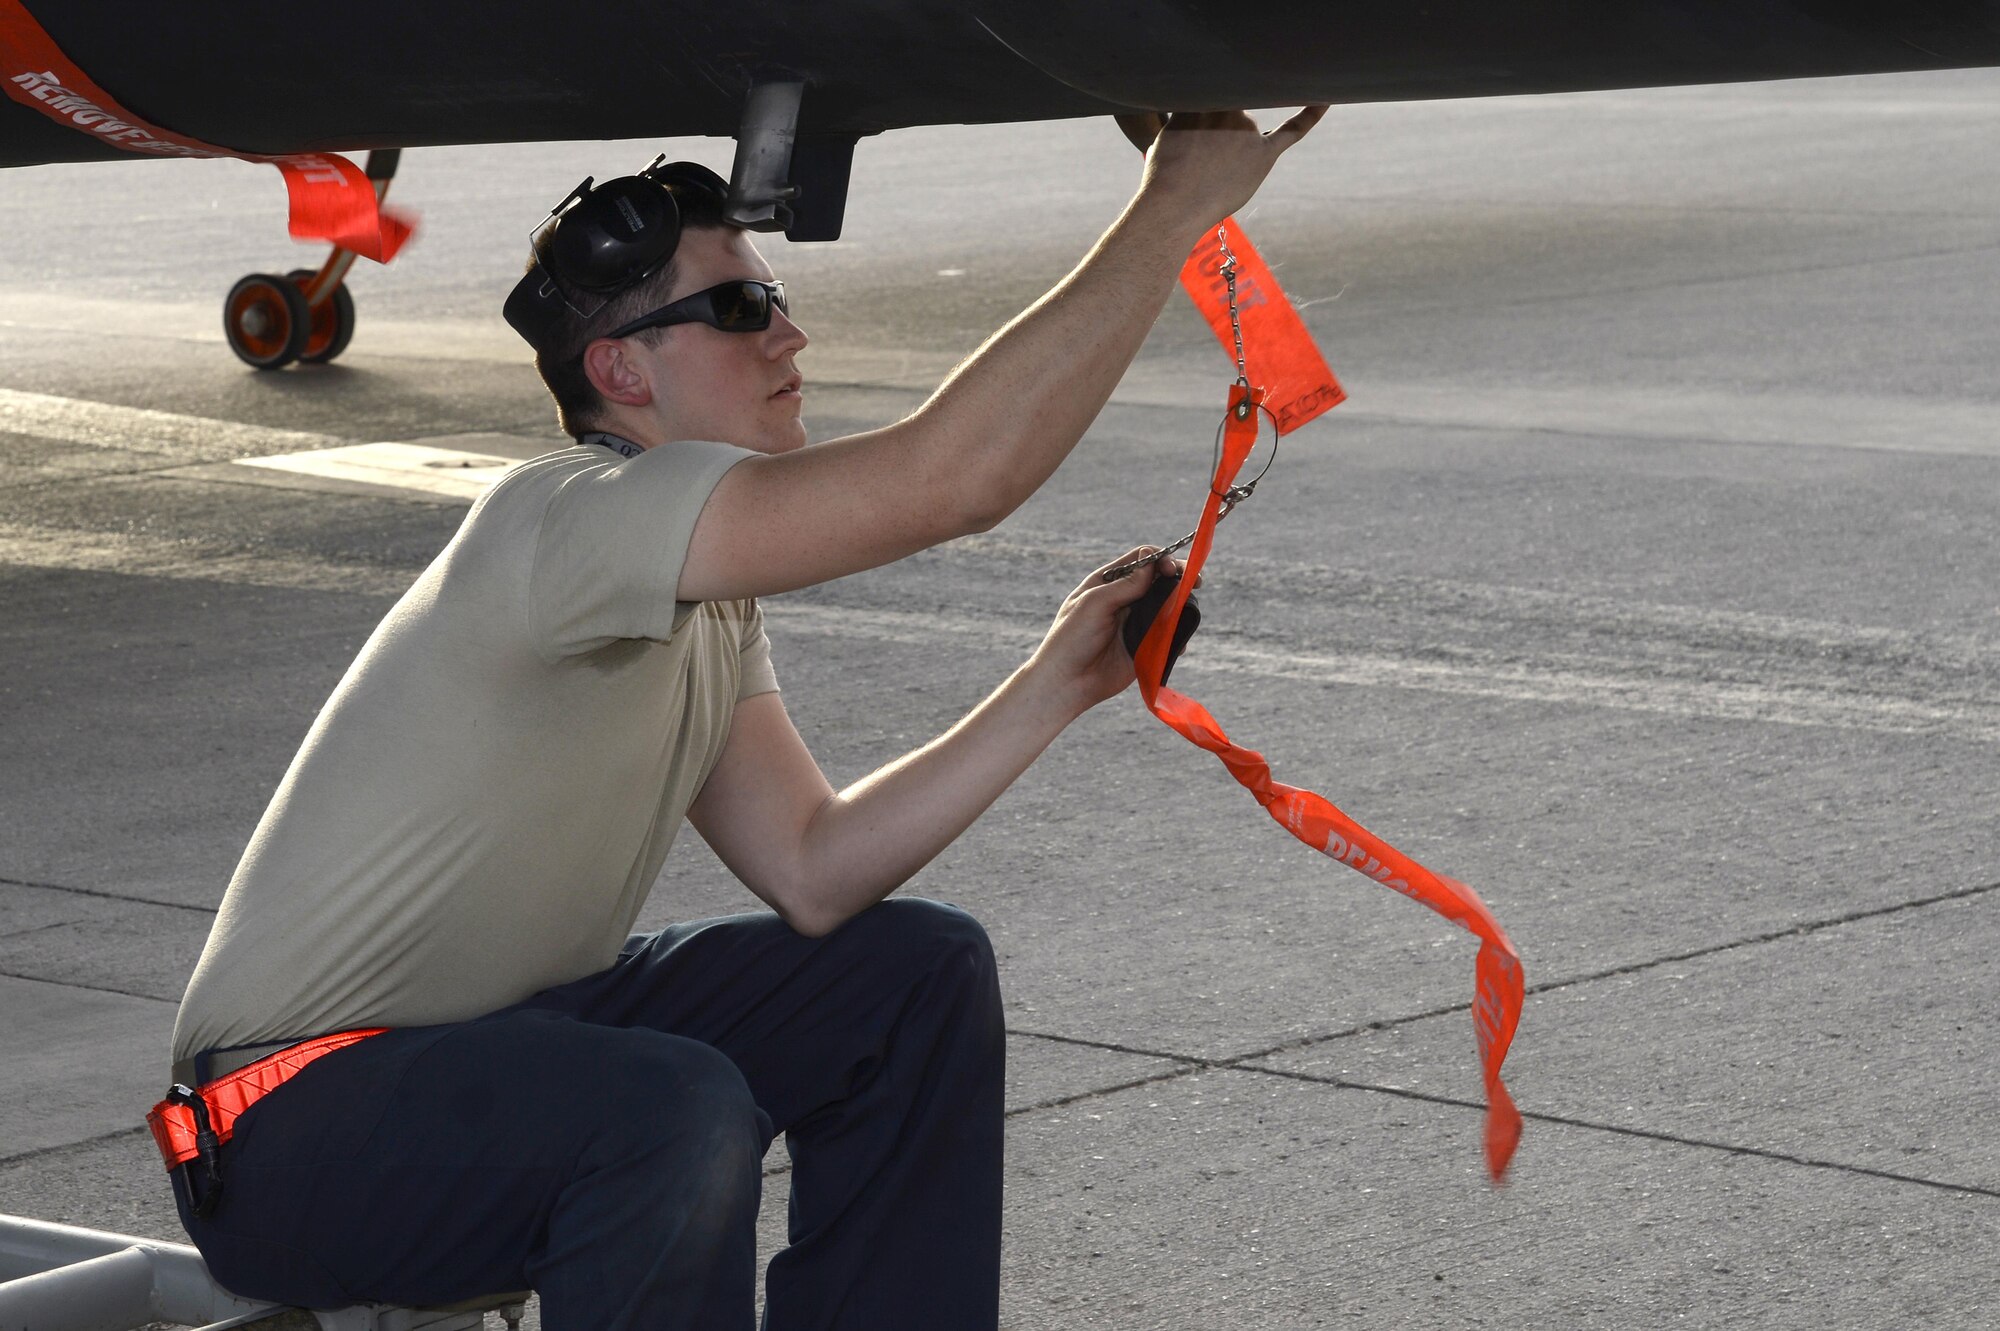 Airman 1st Class Christopher, Dragon Aircraft Maintenance Unit, installs a ‘remove before flight’ flag on a U-2 Dragon Lady in preparation for a post-flight inspection at an undisclosed location in Southwest Asia Feb. 9, 2015. Airmen with the Dragon AMU have been on a constant rotation here for about 11 years now and have played a pivotal role during many of the operations. Christopher is currently deployed from Beale Air Force Base, Calif. (U.S. Air Force photo/Tech. Sgt. Marie Brown)